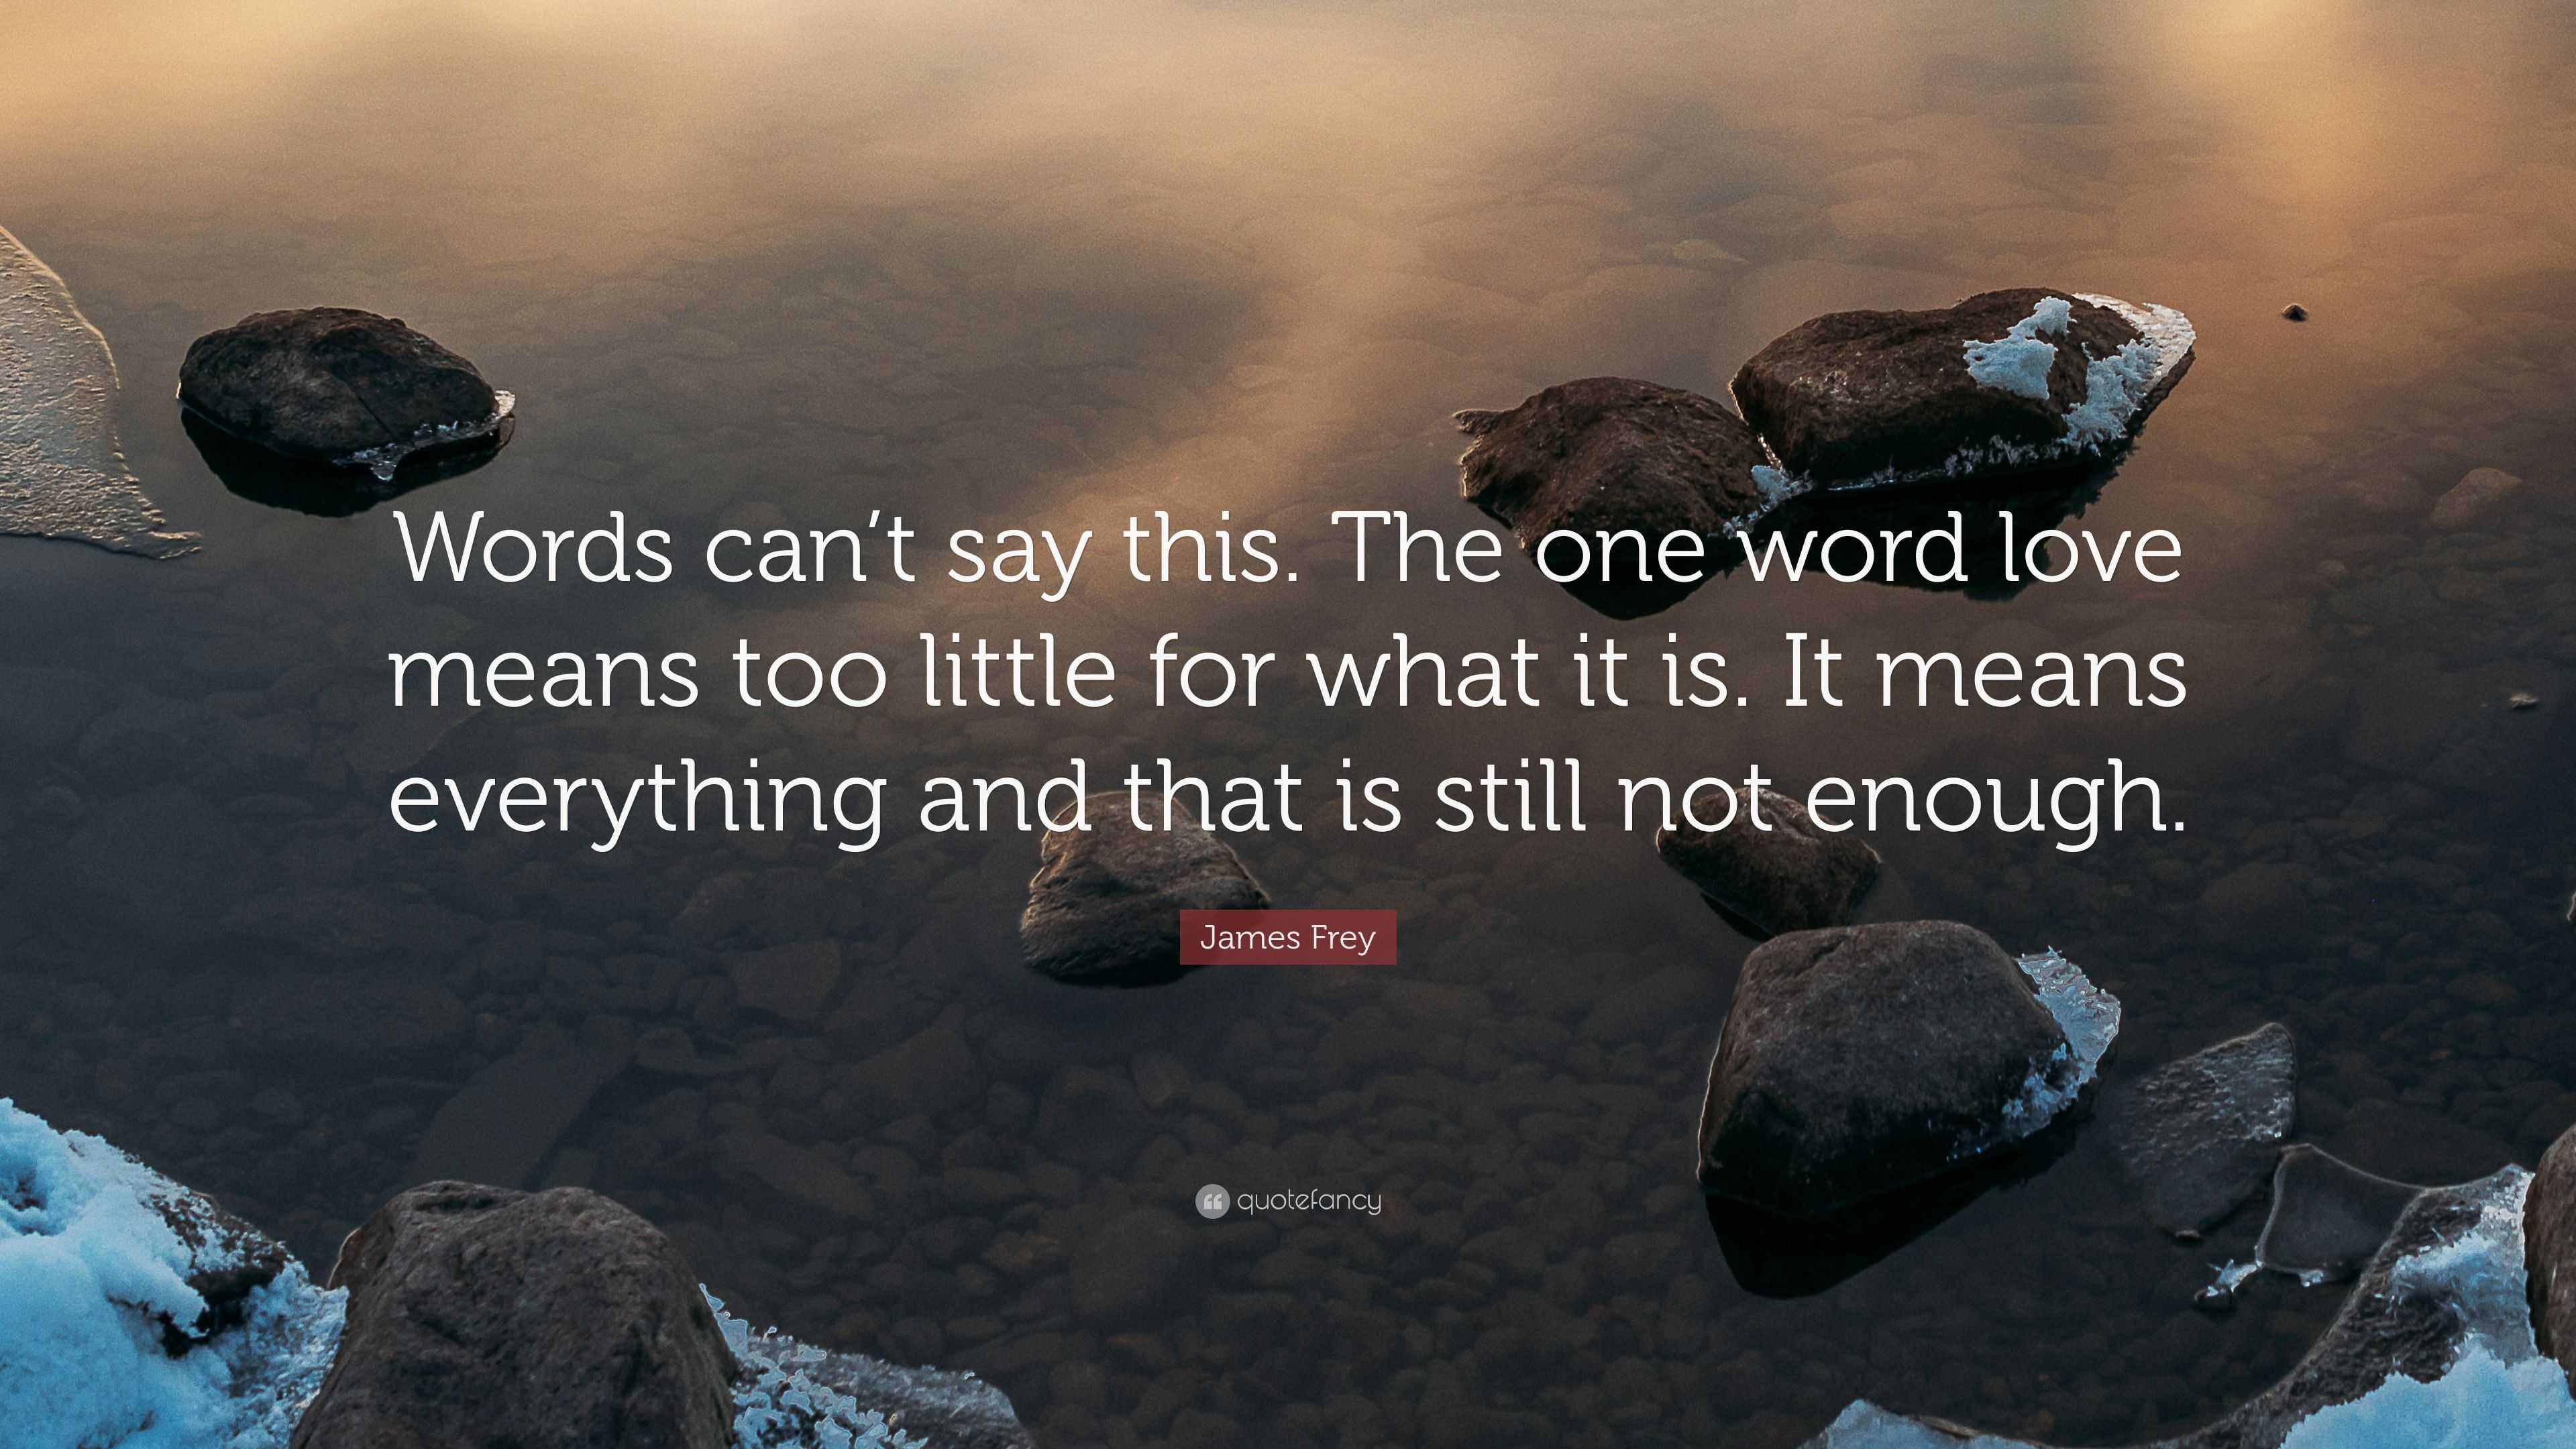 James Frey Quote “Words can t say this The one word love